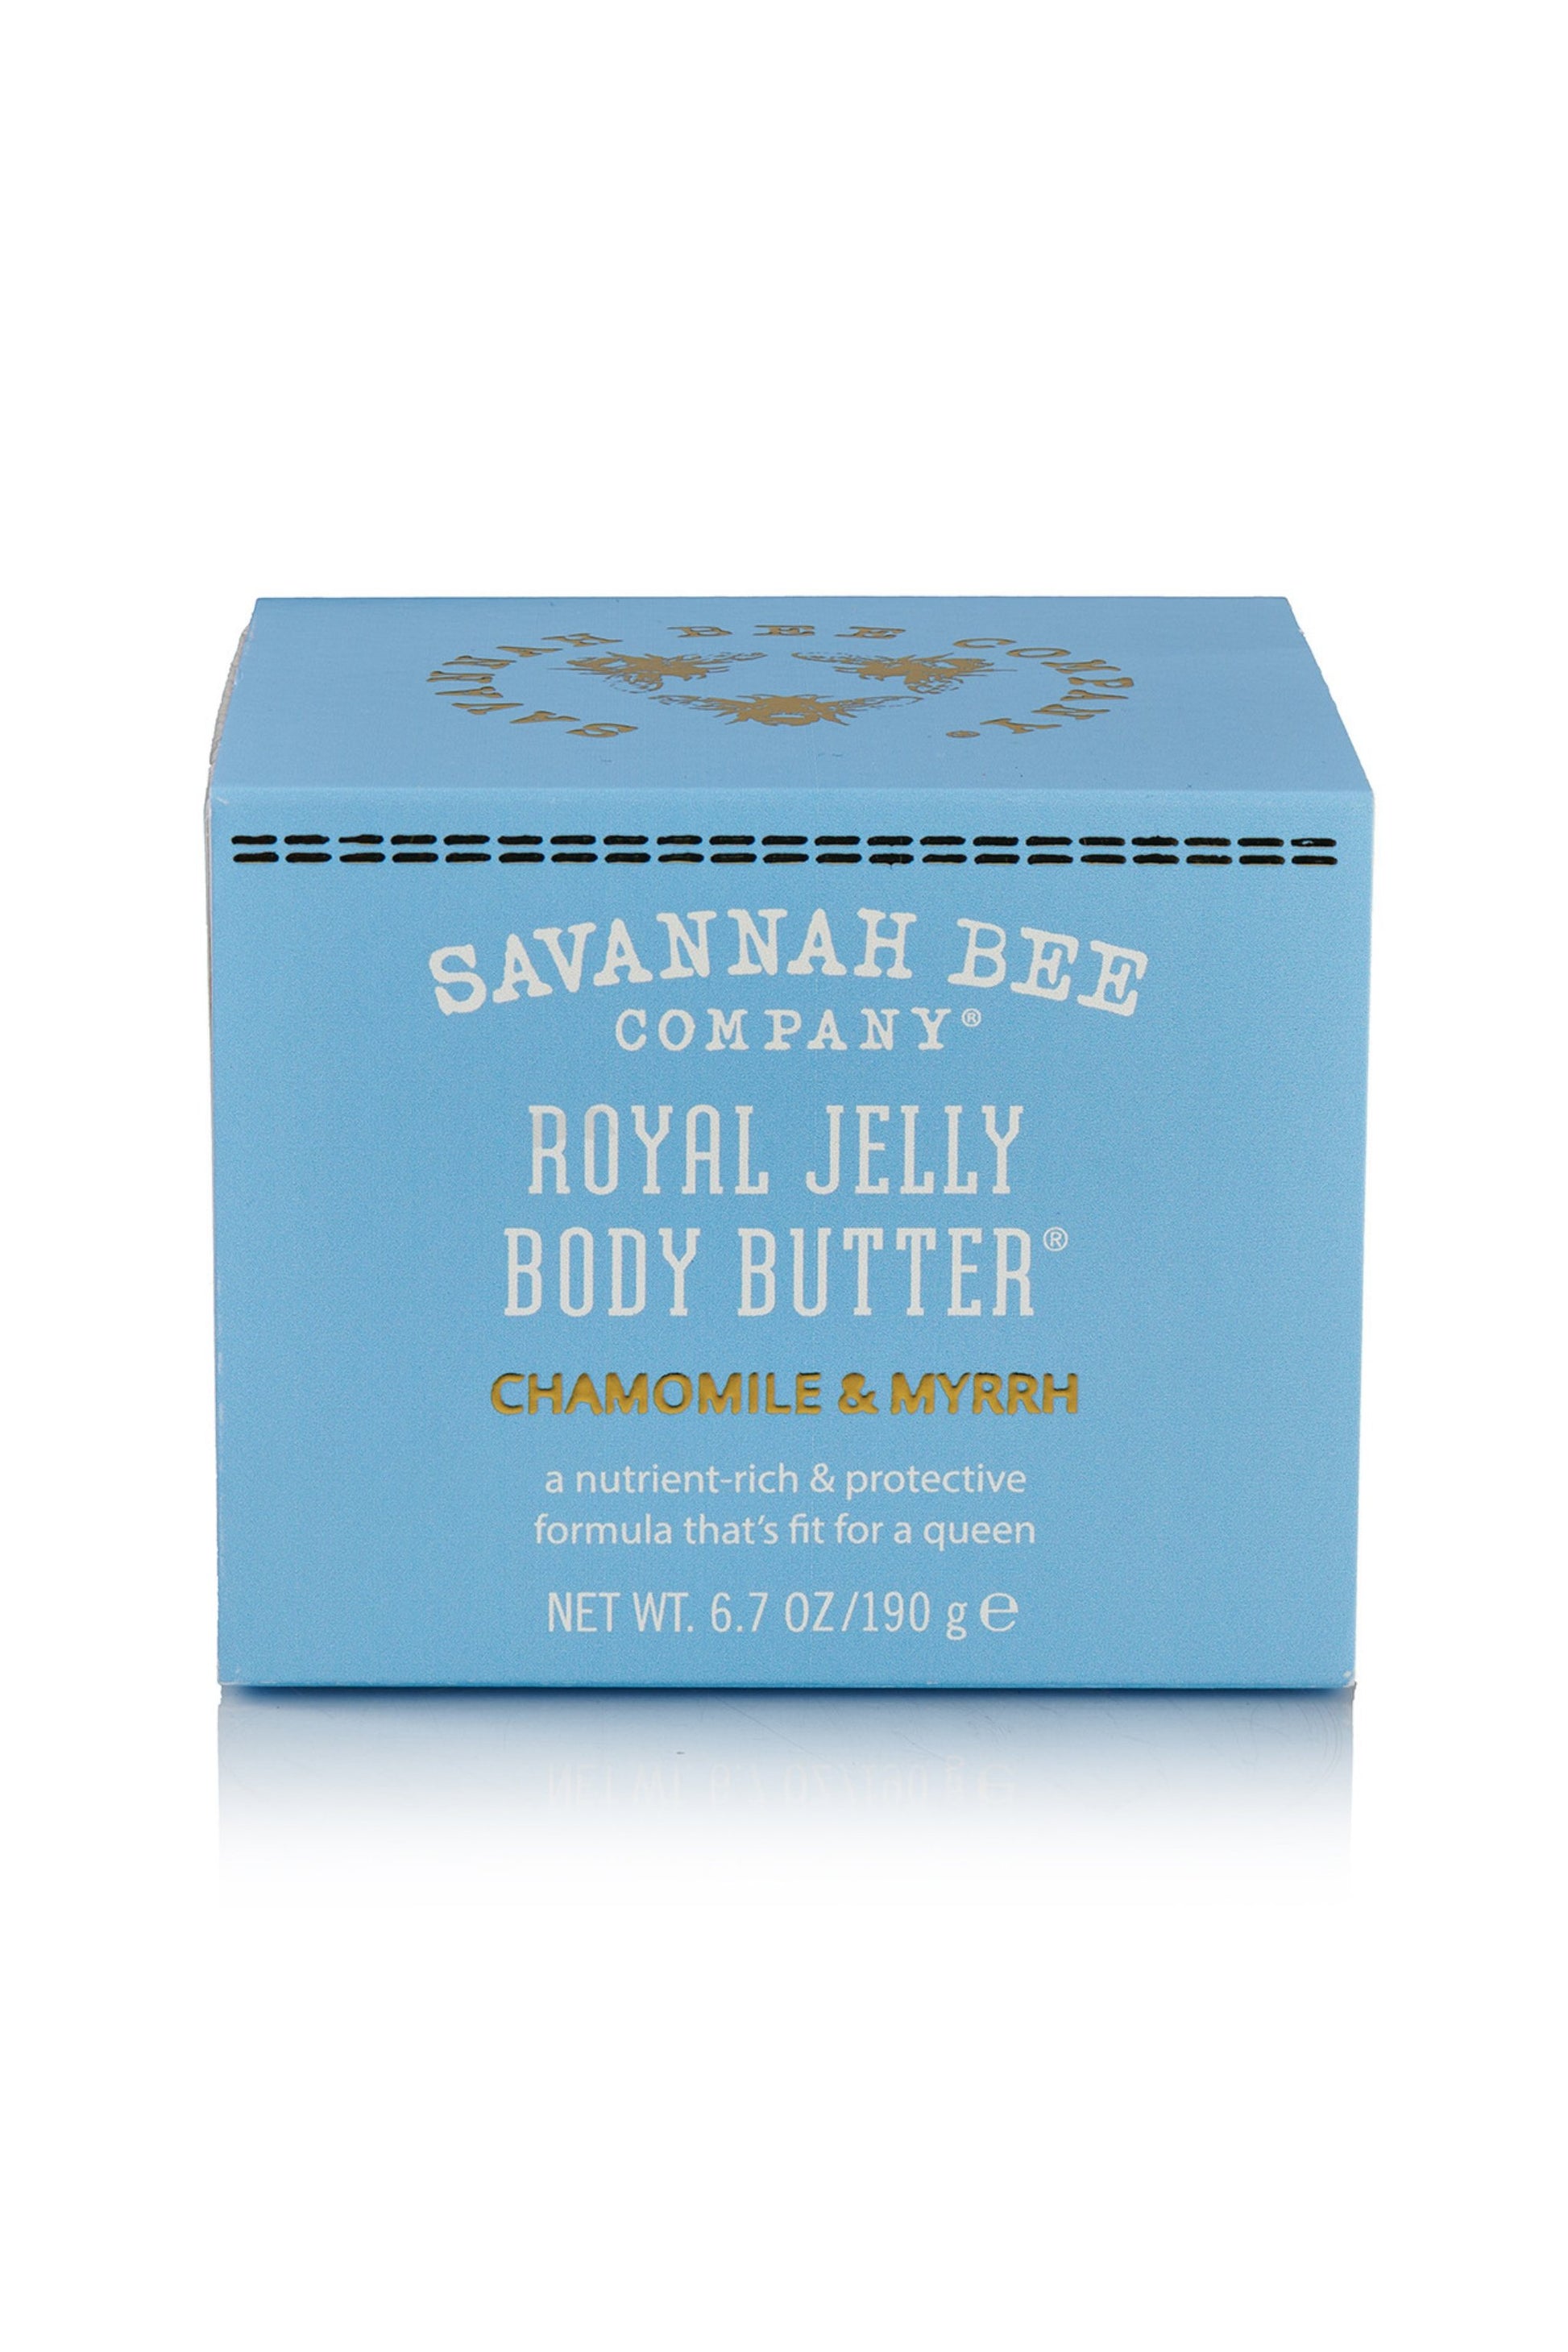 Royal Jelly Body Butter Chamomile & Myrrh in a 6.7 oz.  packaging